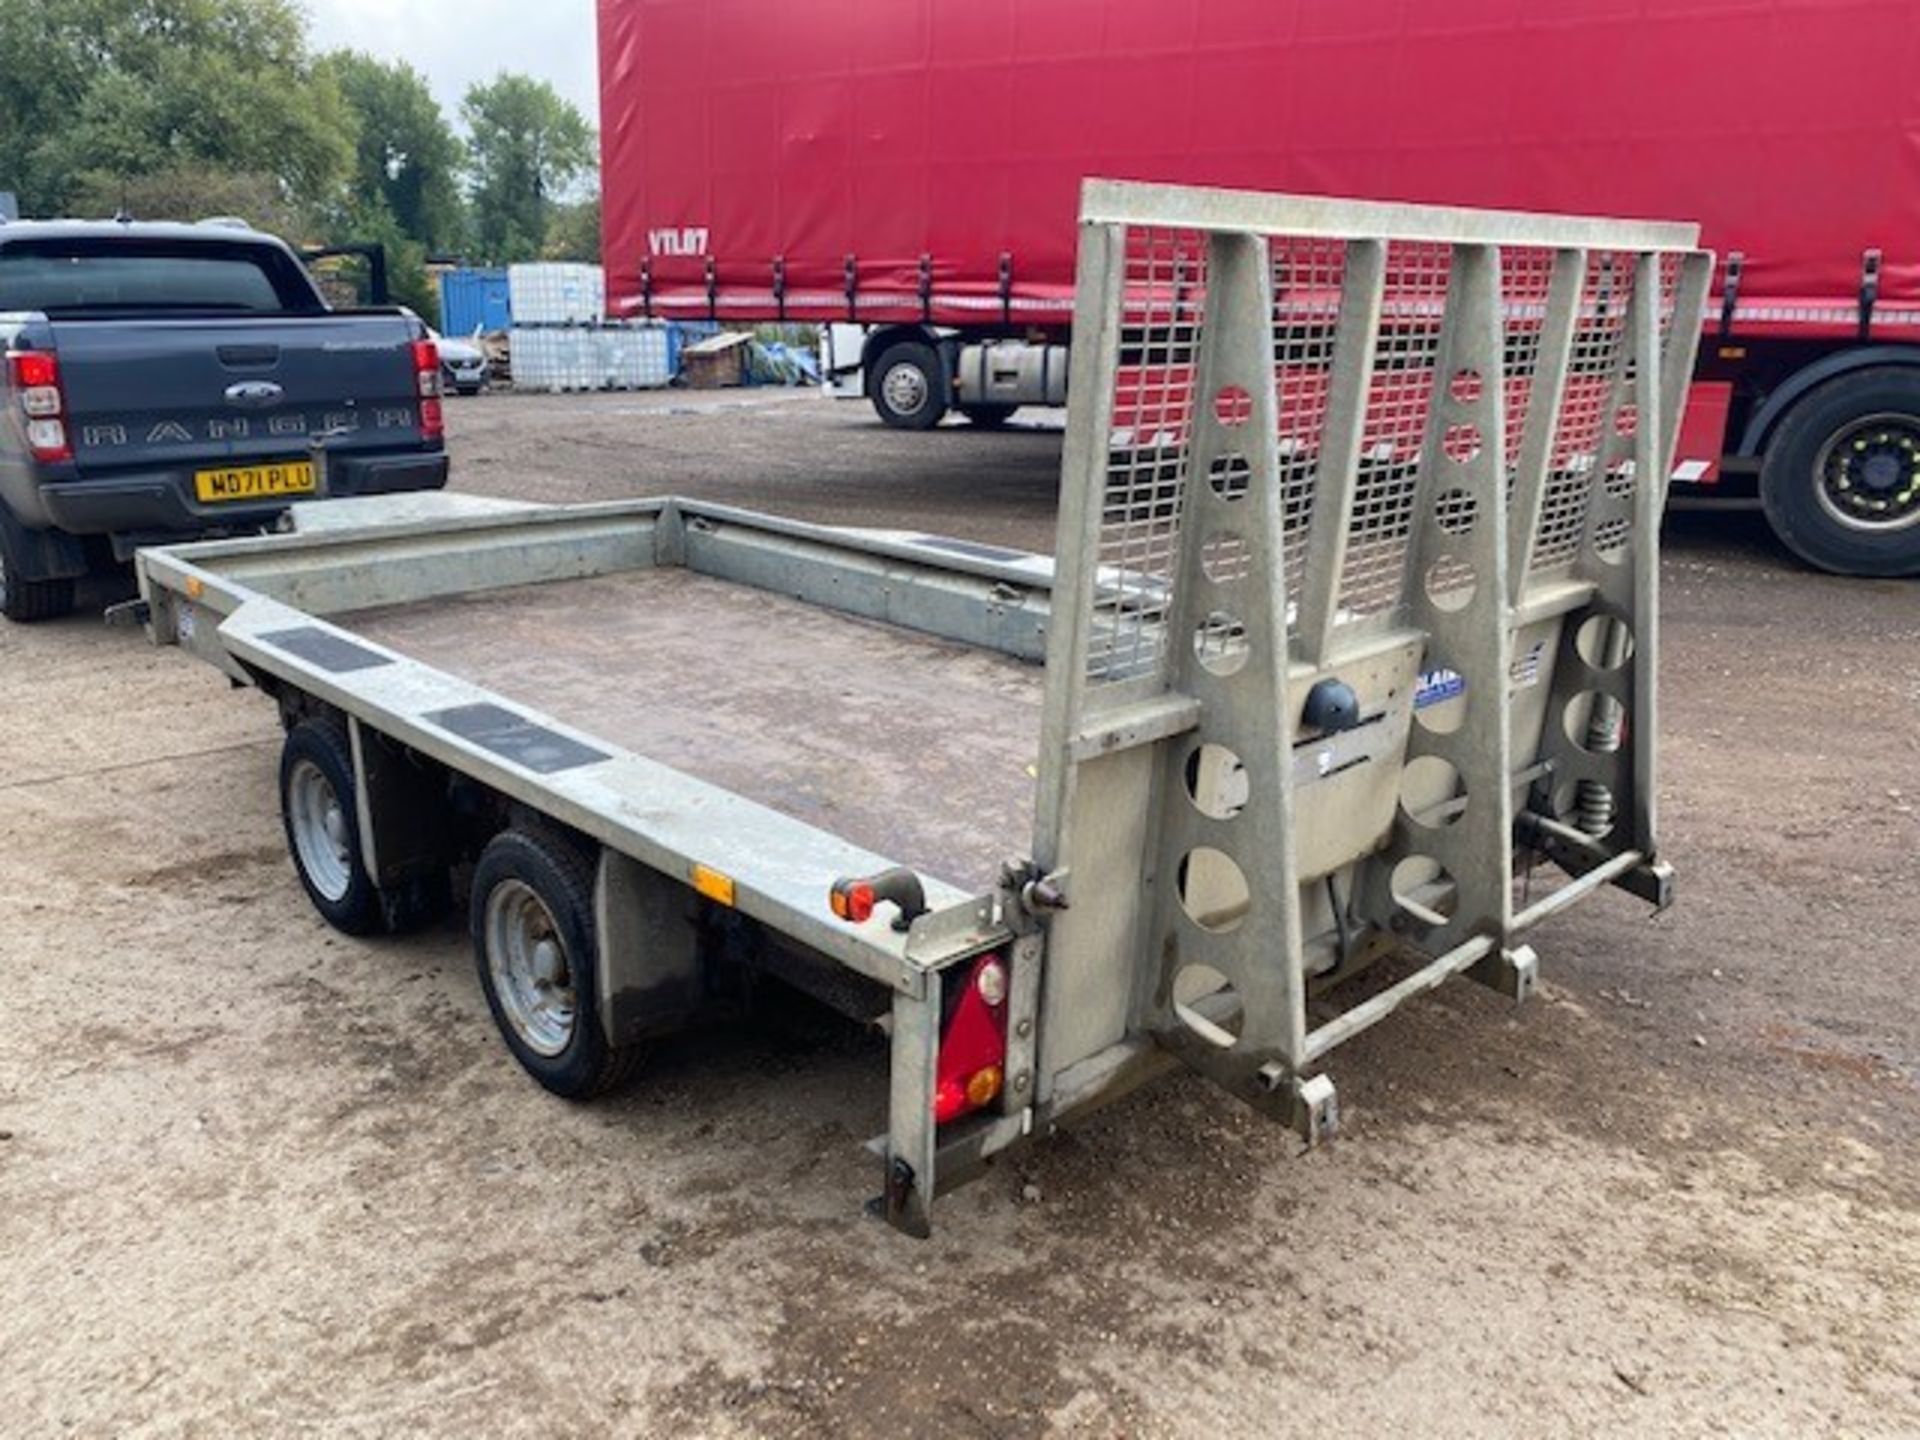 Ifor Williams 12 x 6 Plant Trailer, One Owner From New, Ball Hitch, Good Trailer All Round*PLUS VAT* - Image 3 of 10